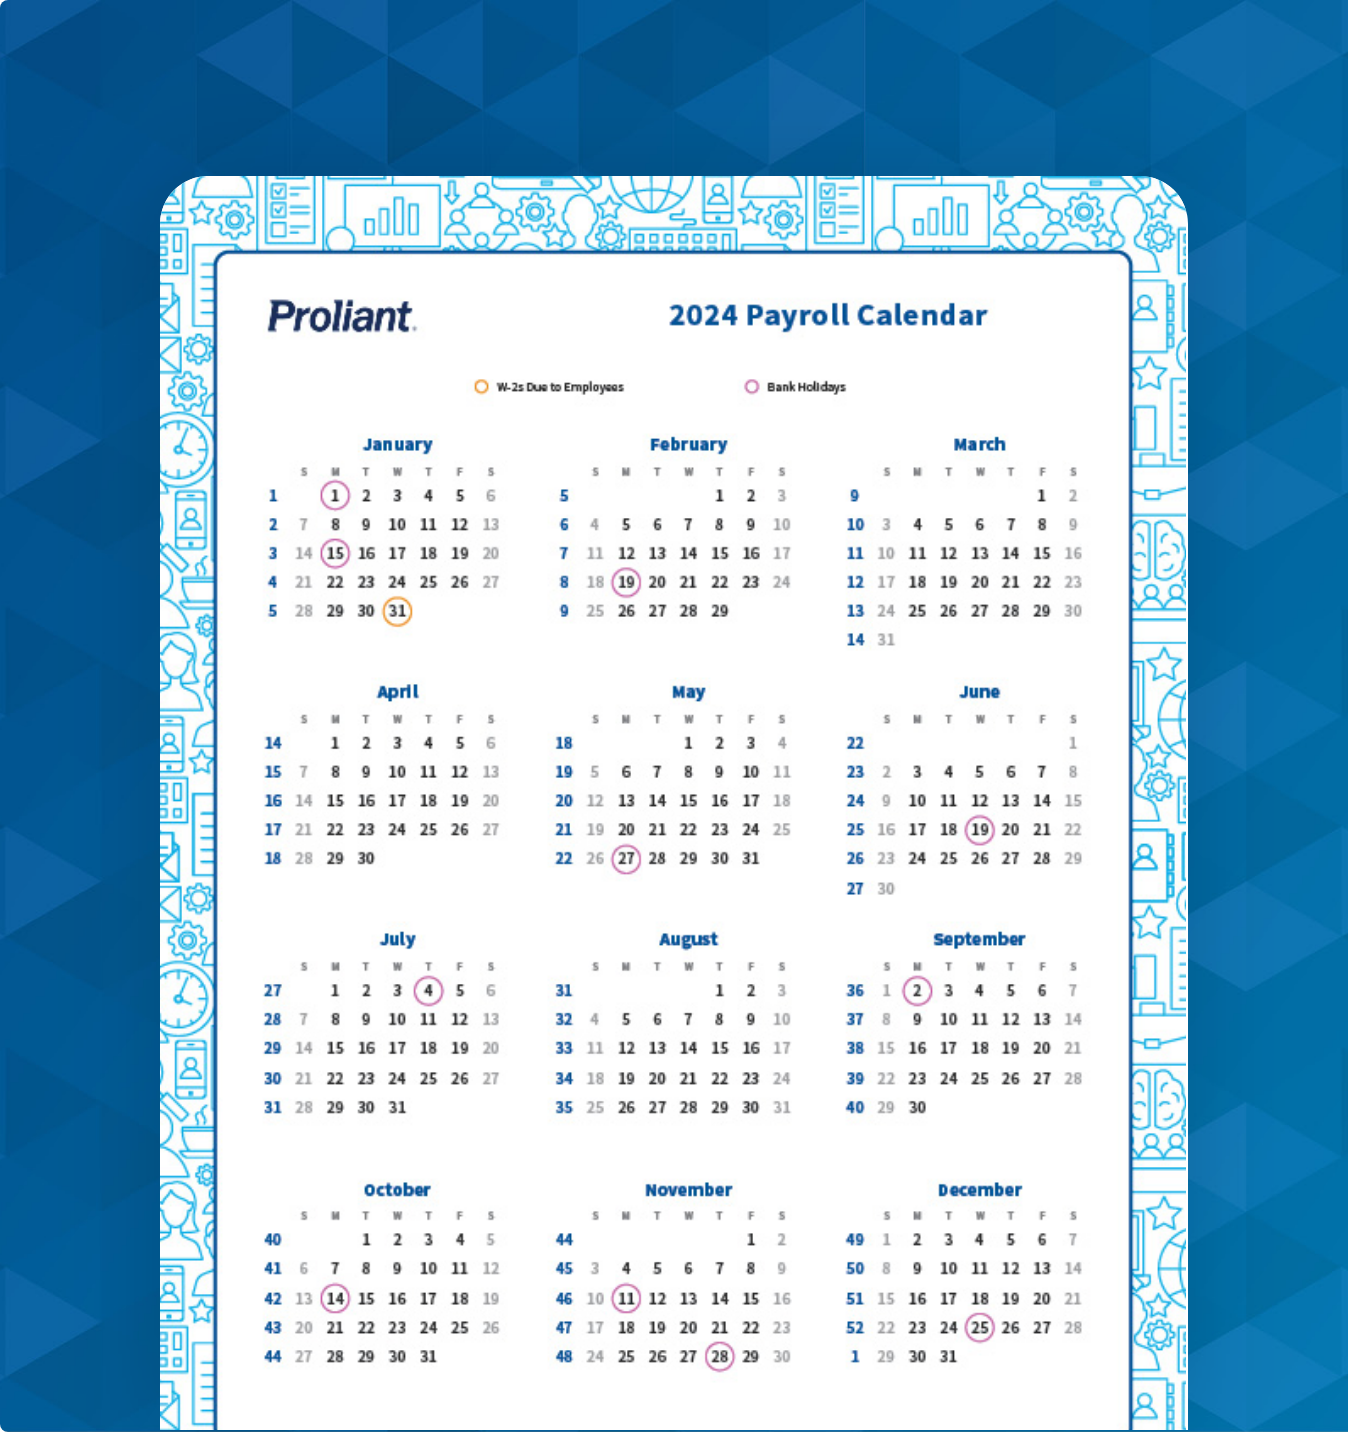 payroll-banking-holiday-calendar-2024-featured-image